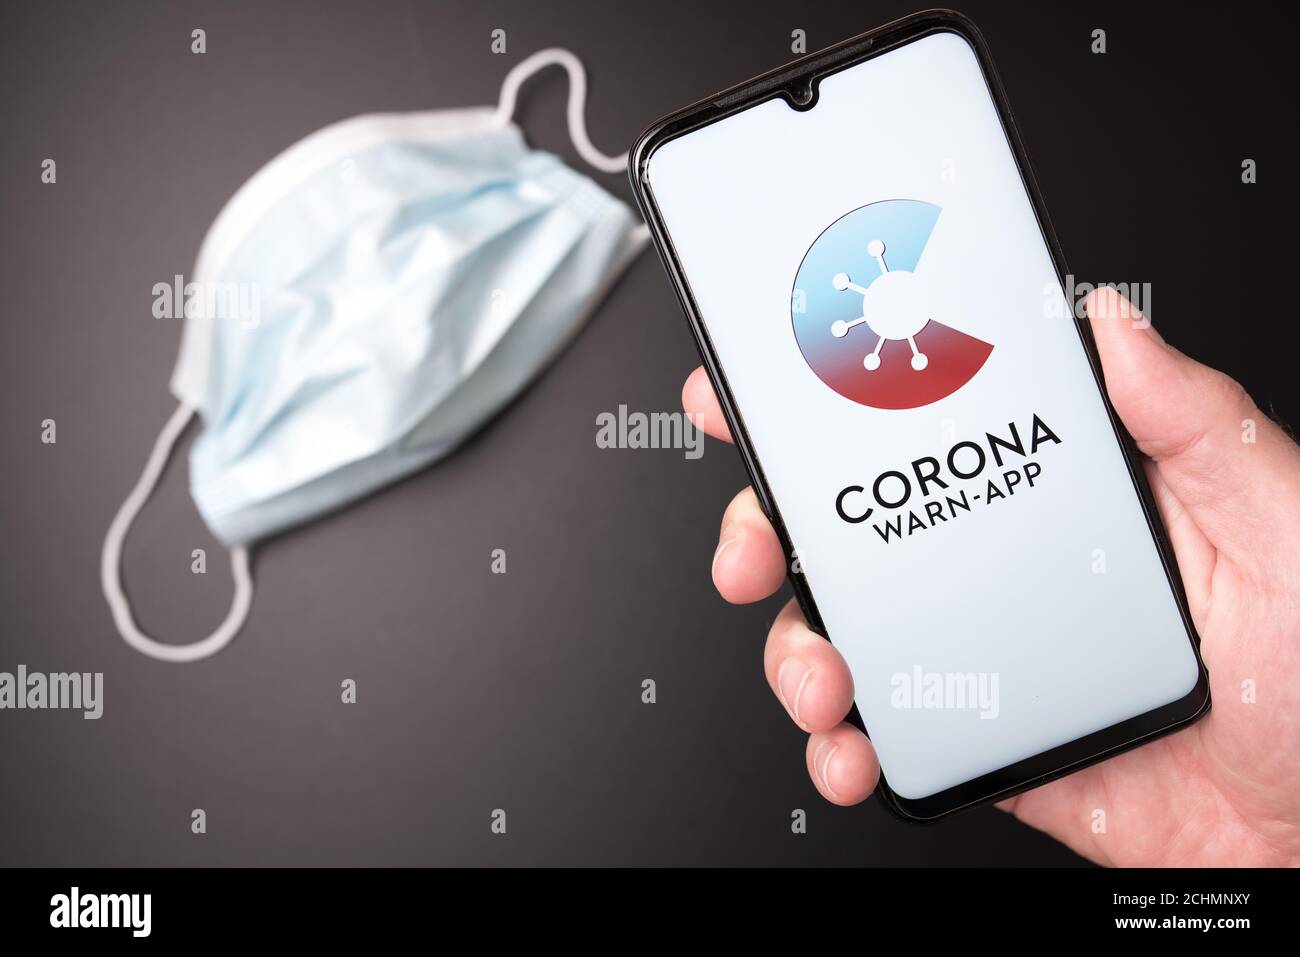 2020-09-14 Hamburg, Germany: hand holding smartphone with German COVID-19 contact tracing app against dark background with disposable face mask Stock Photo